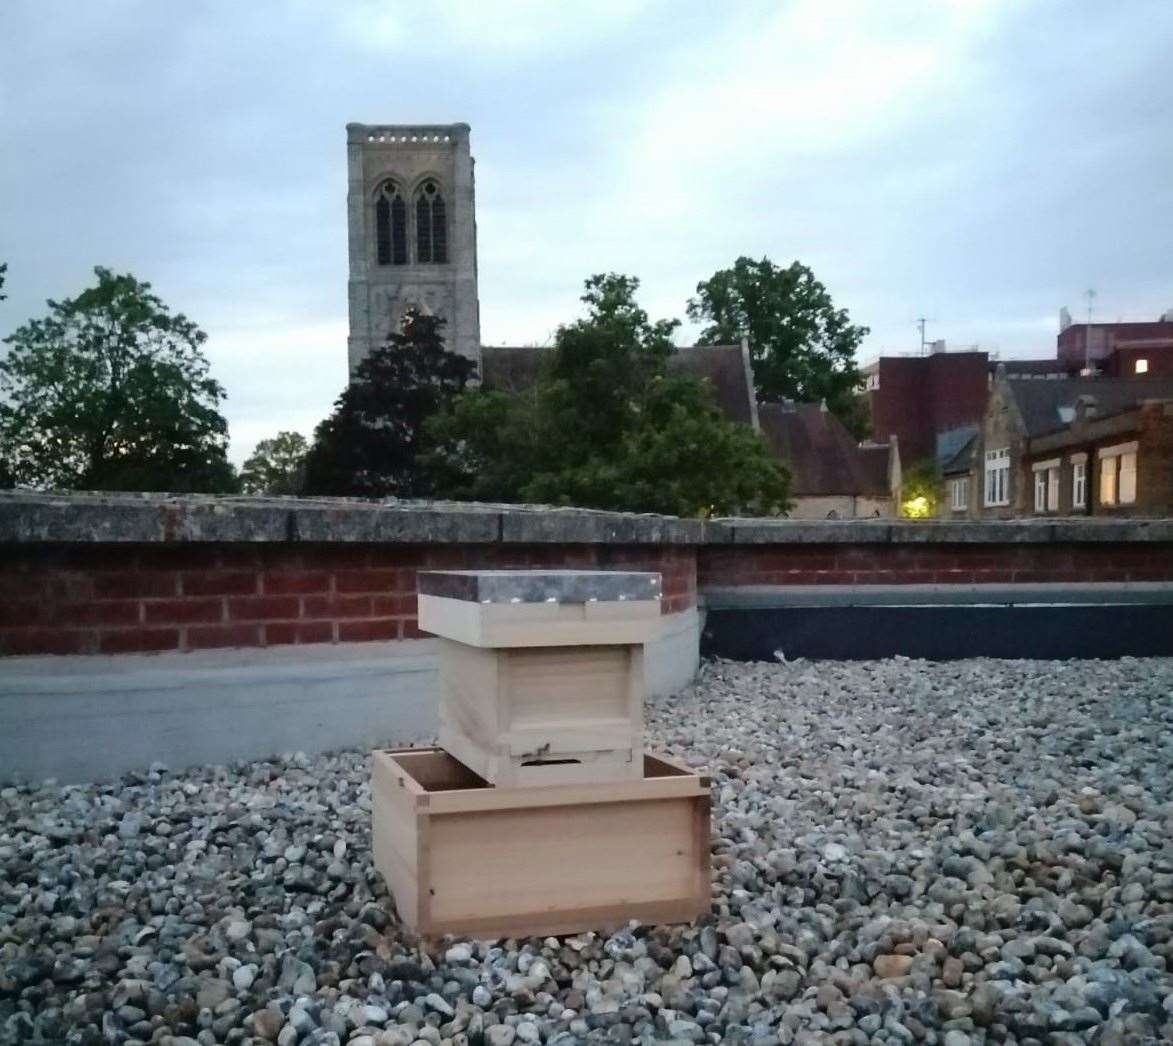 Hives which will house thousands of bees have been set up on the roof of the Fremlin Walk